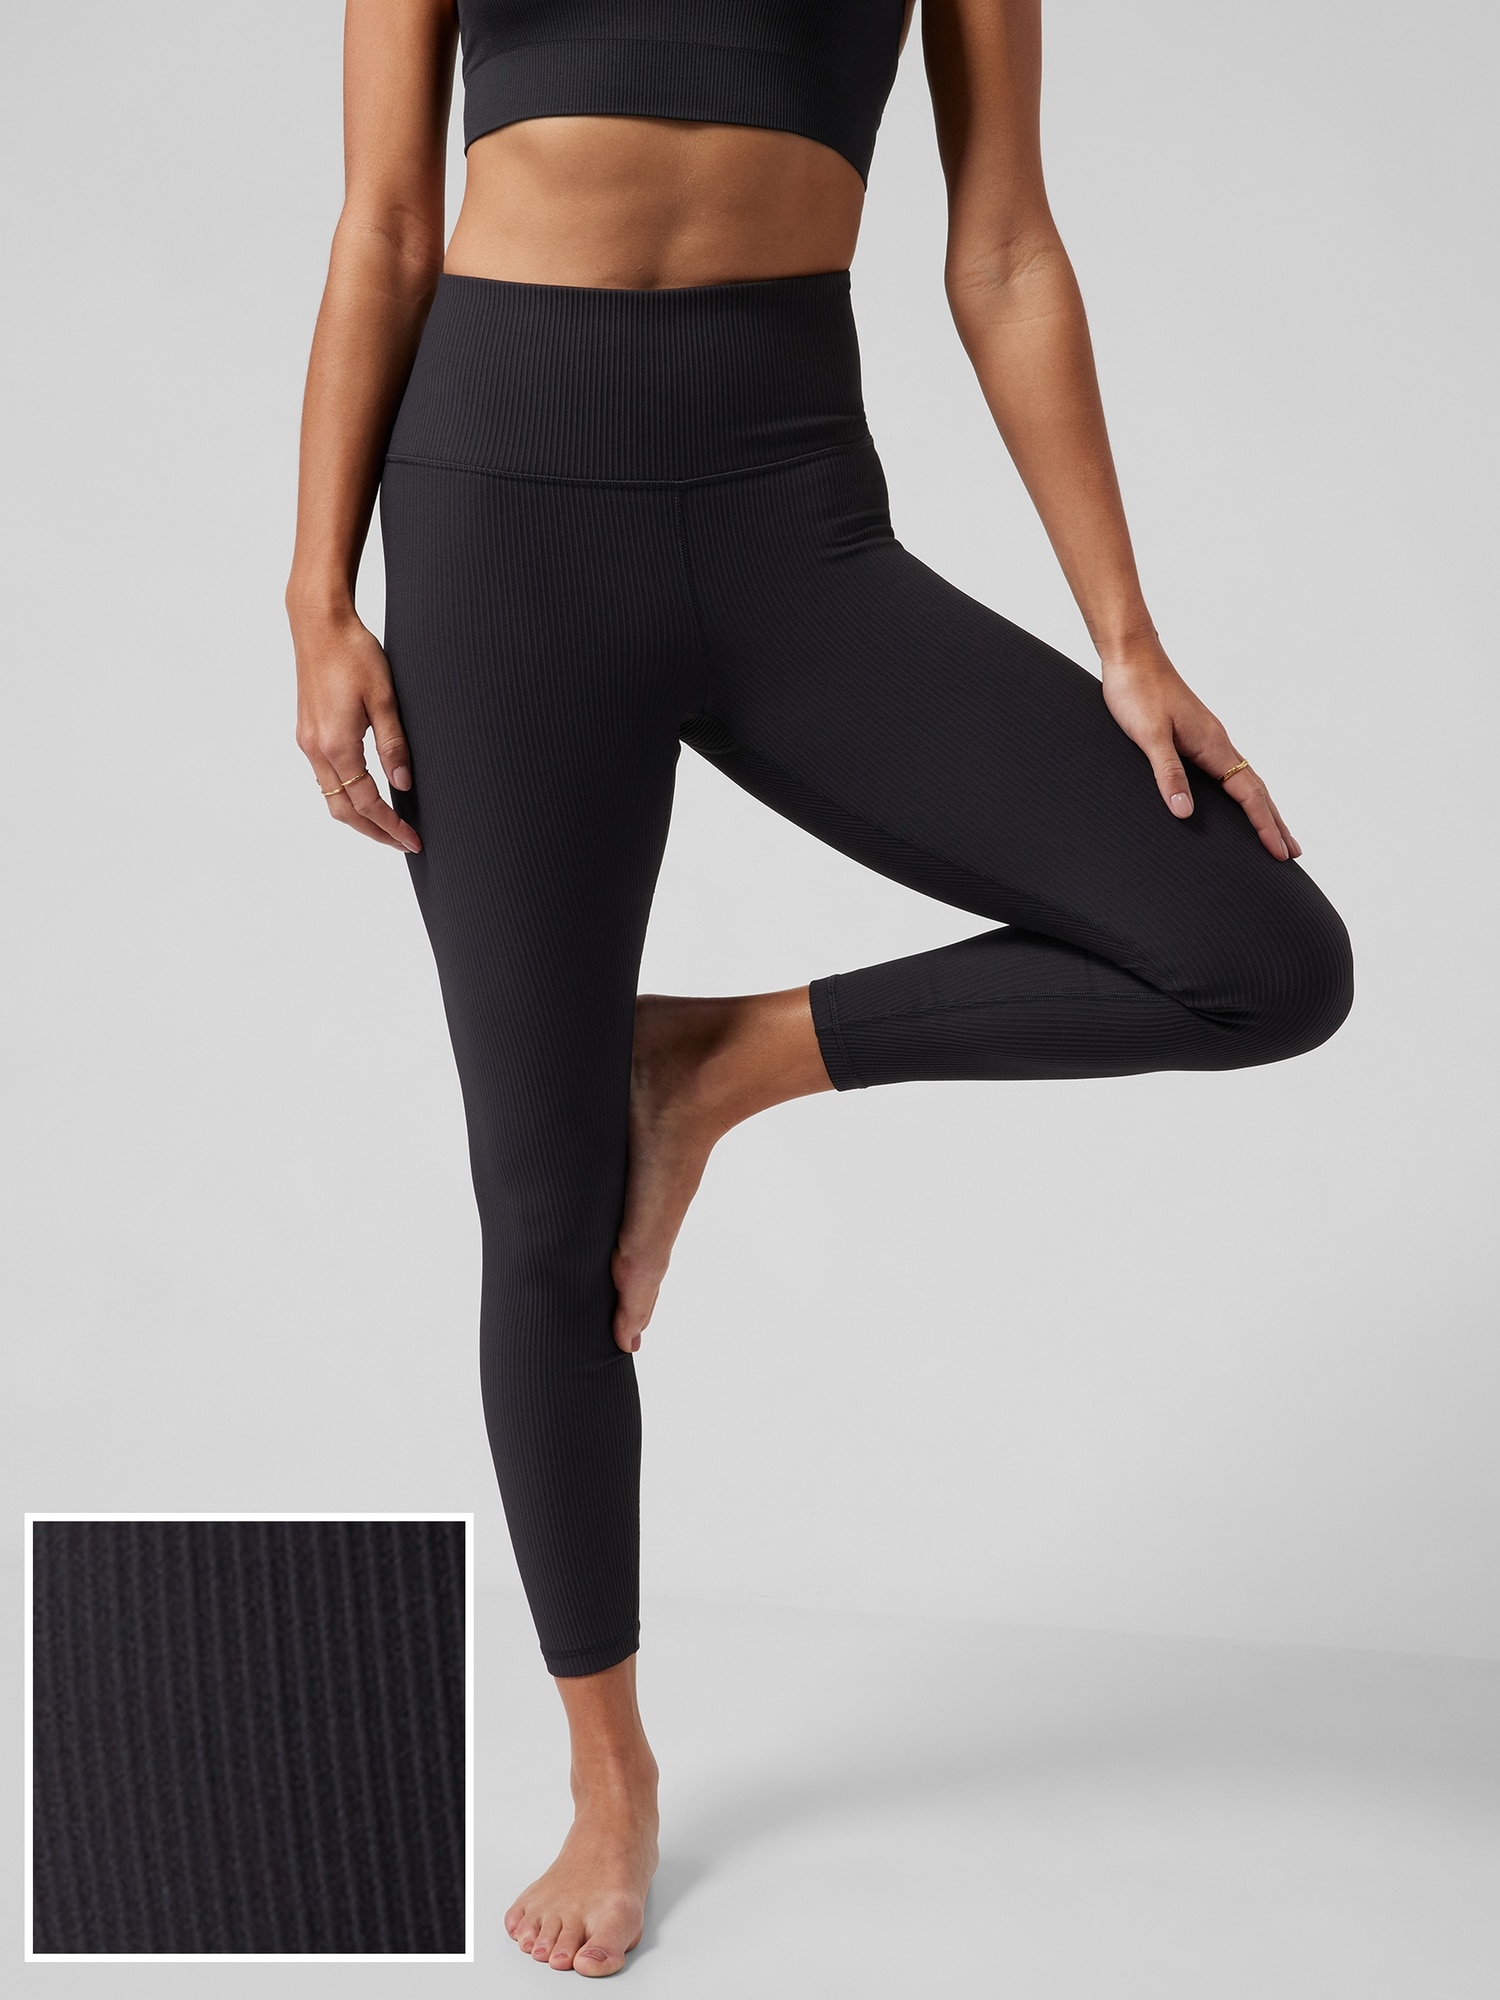 Super Quality High Waist Sports Stretch Fabric Tight Leggings with Poc –  HER SHOP